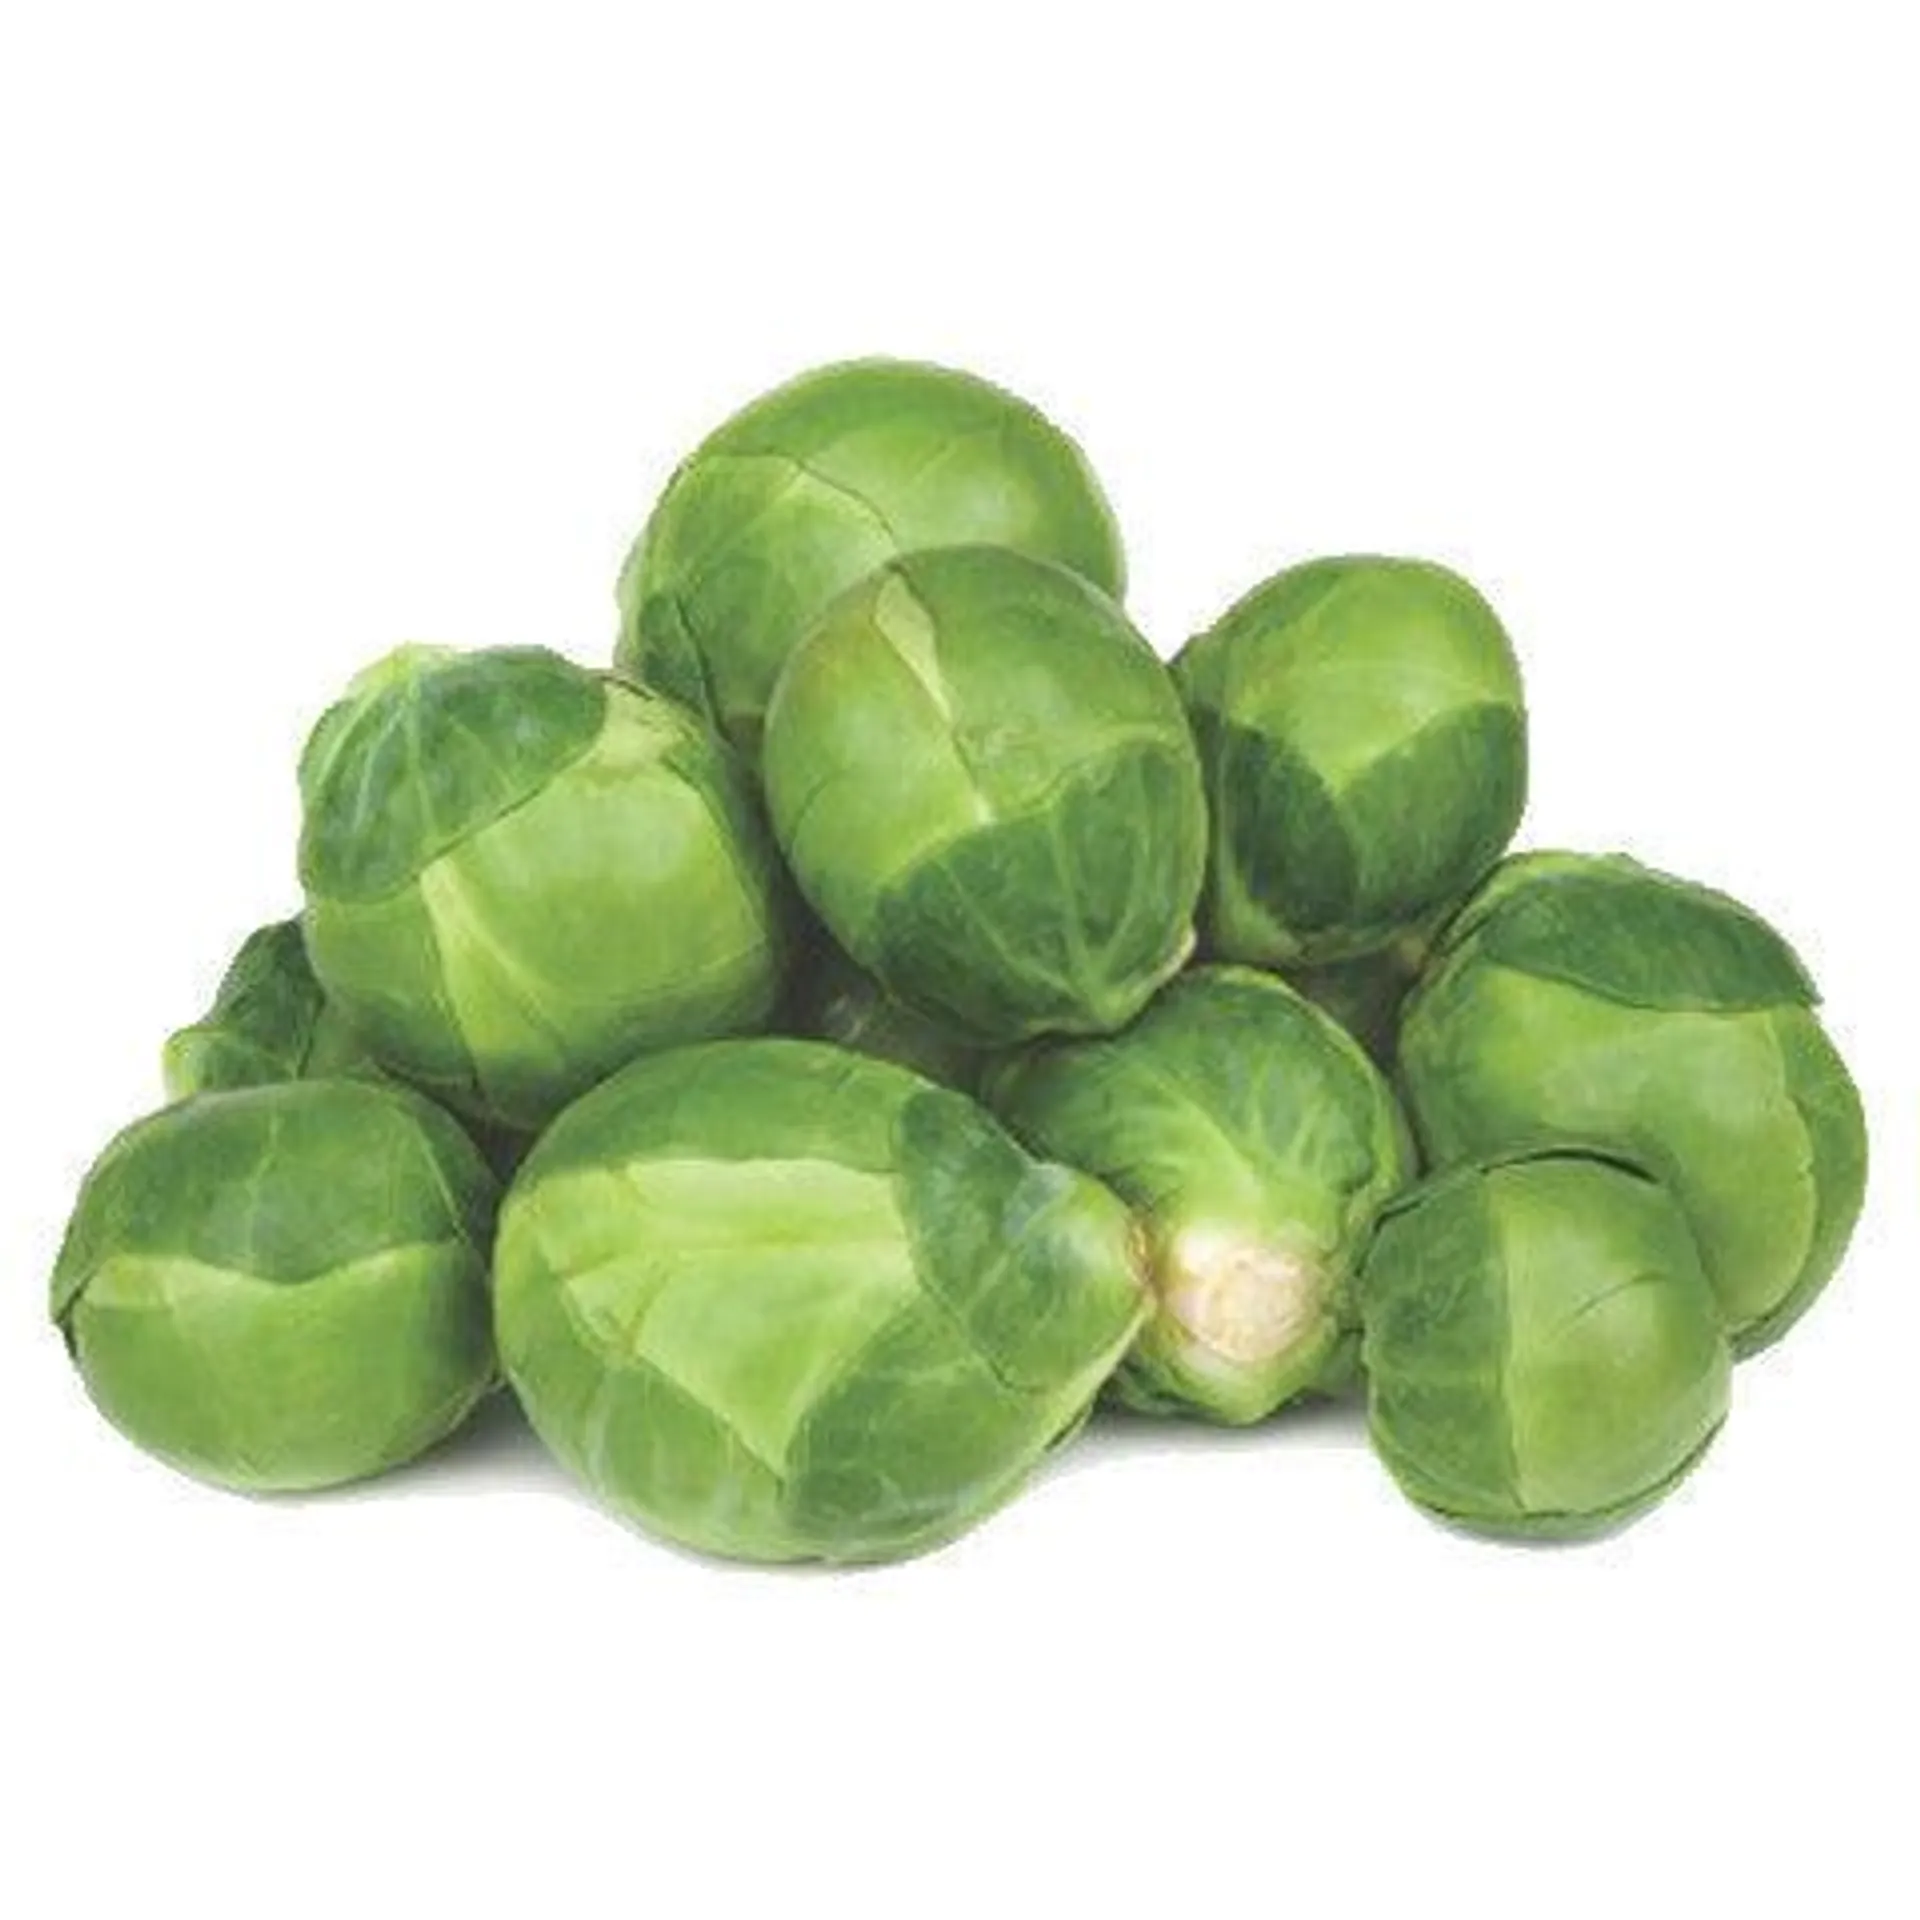 Brussels Sprout min 500g